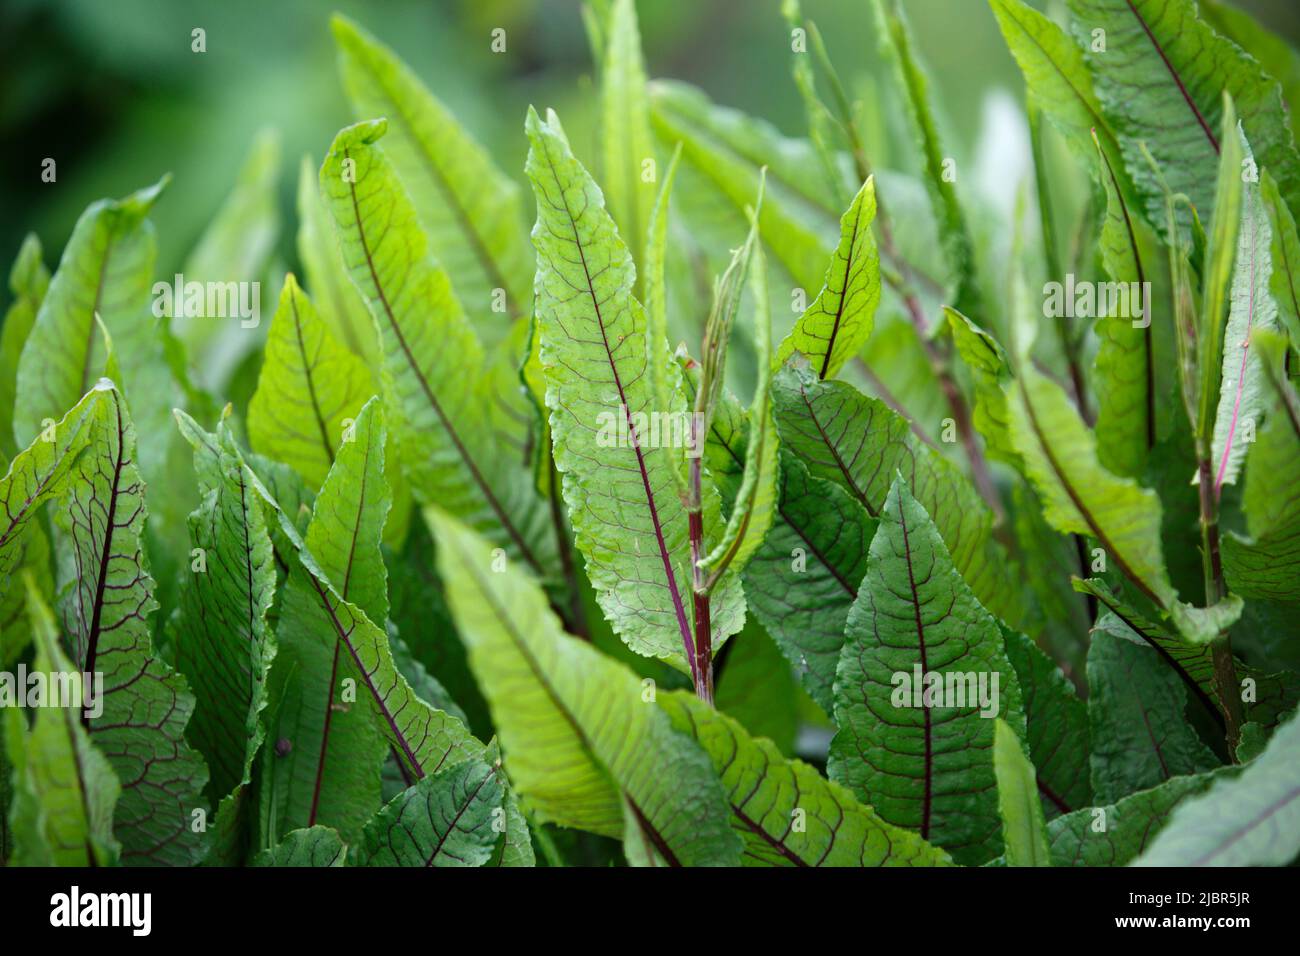 Rumex sanguineus. Sorrel is blood-red in the open ground. Large oblong-lanceolate medium green leaves with purple pronounced veins Stock Photo